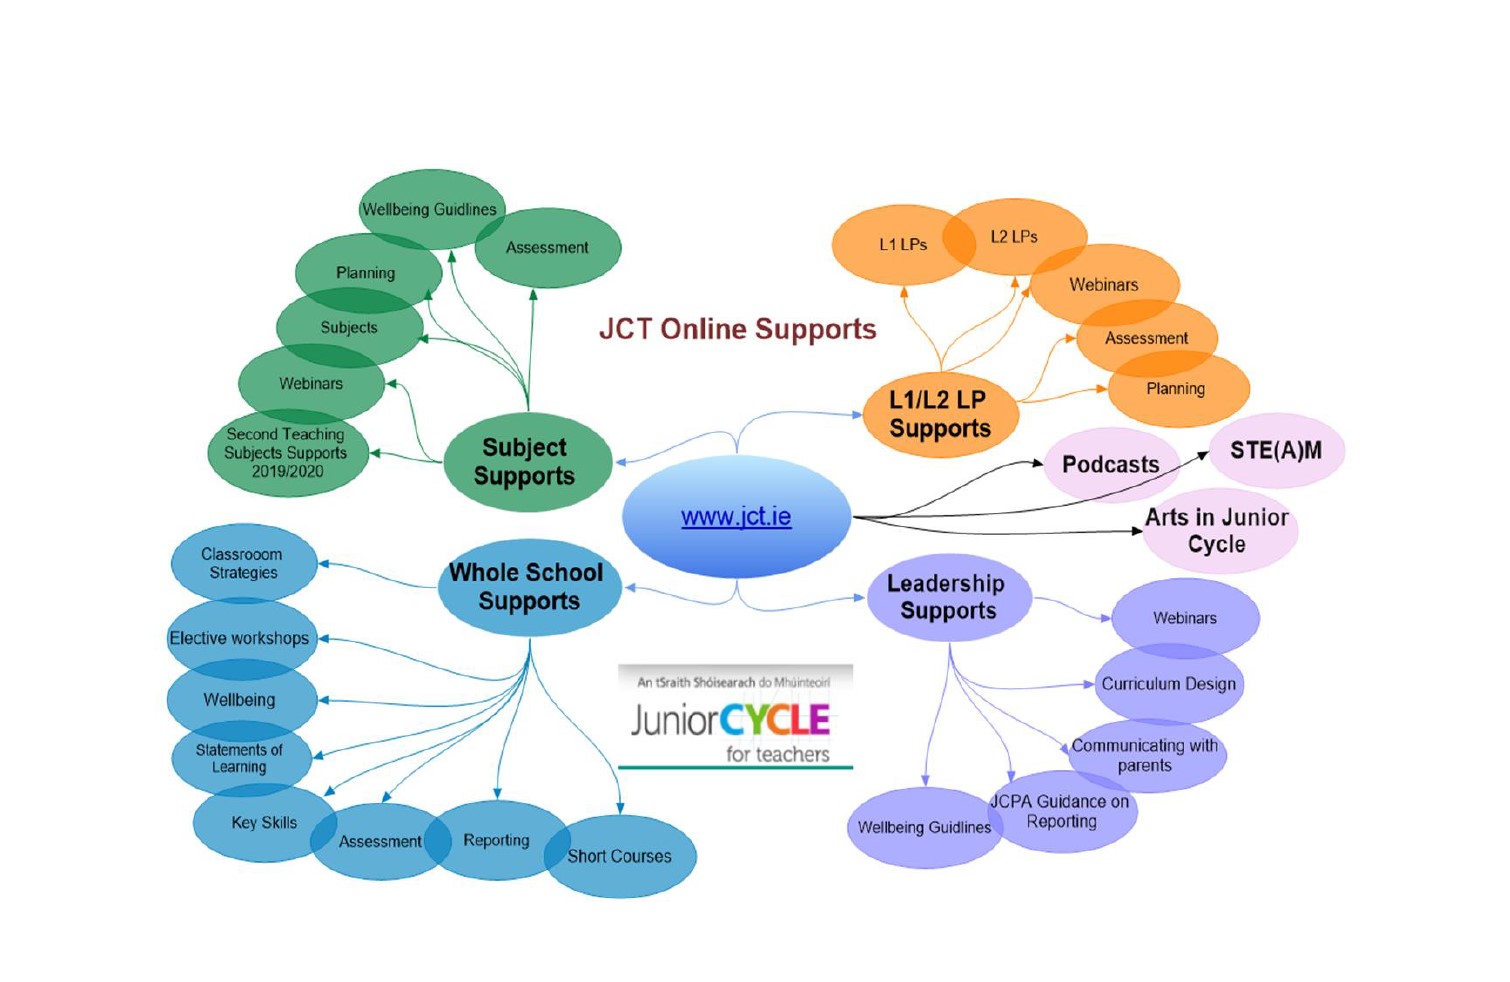 JCT Online Supports